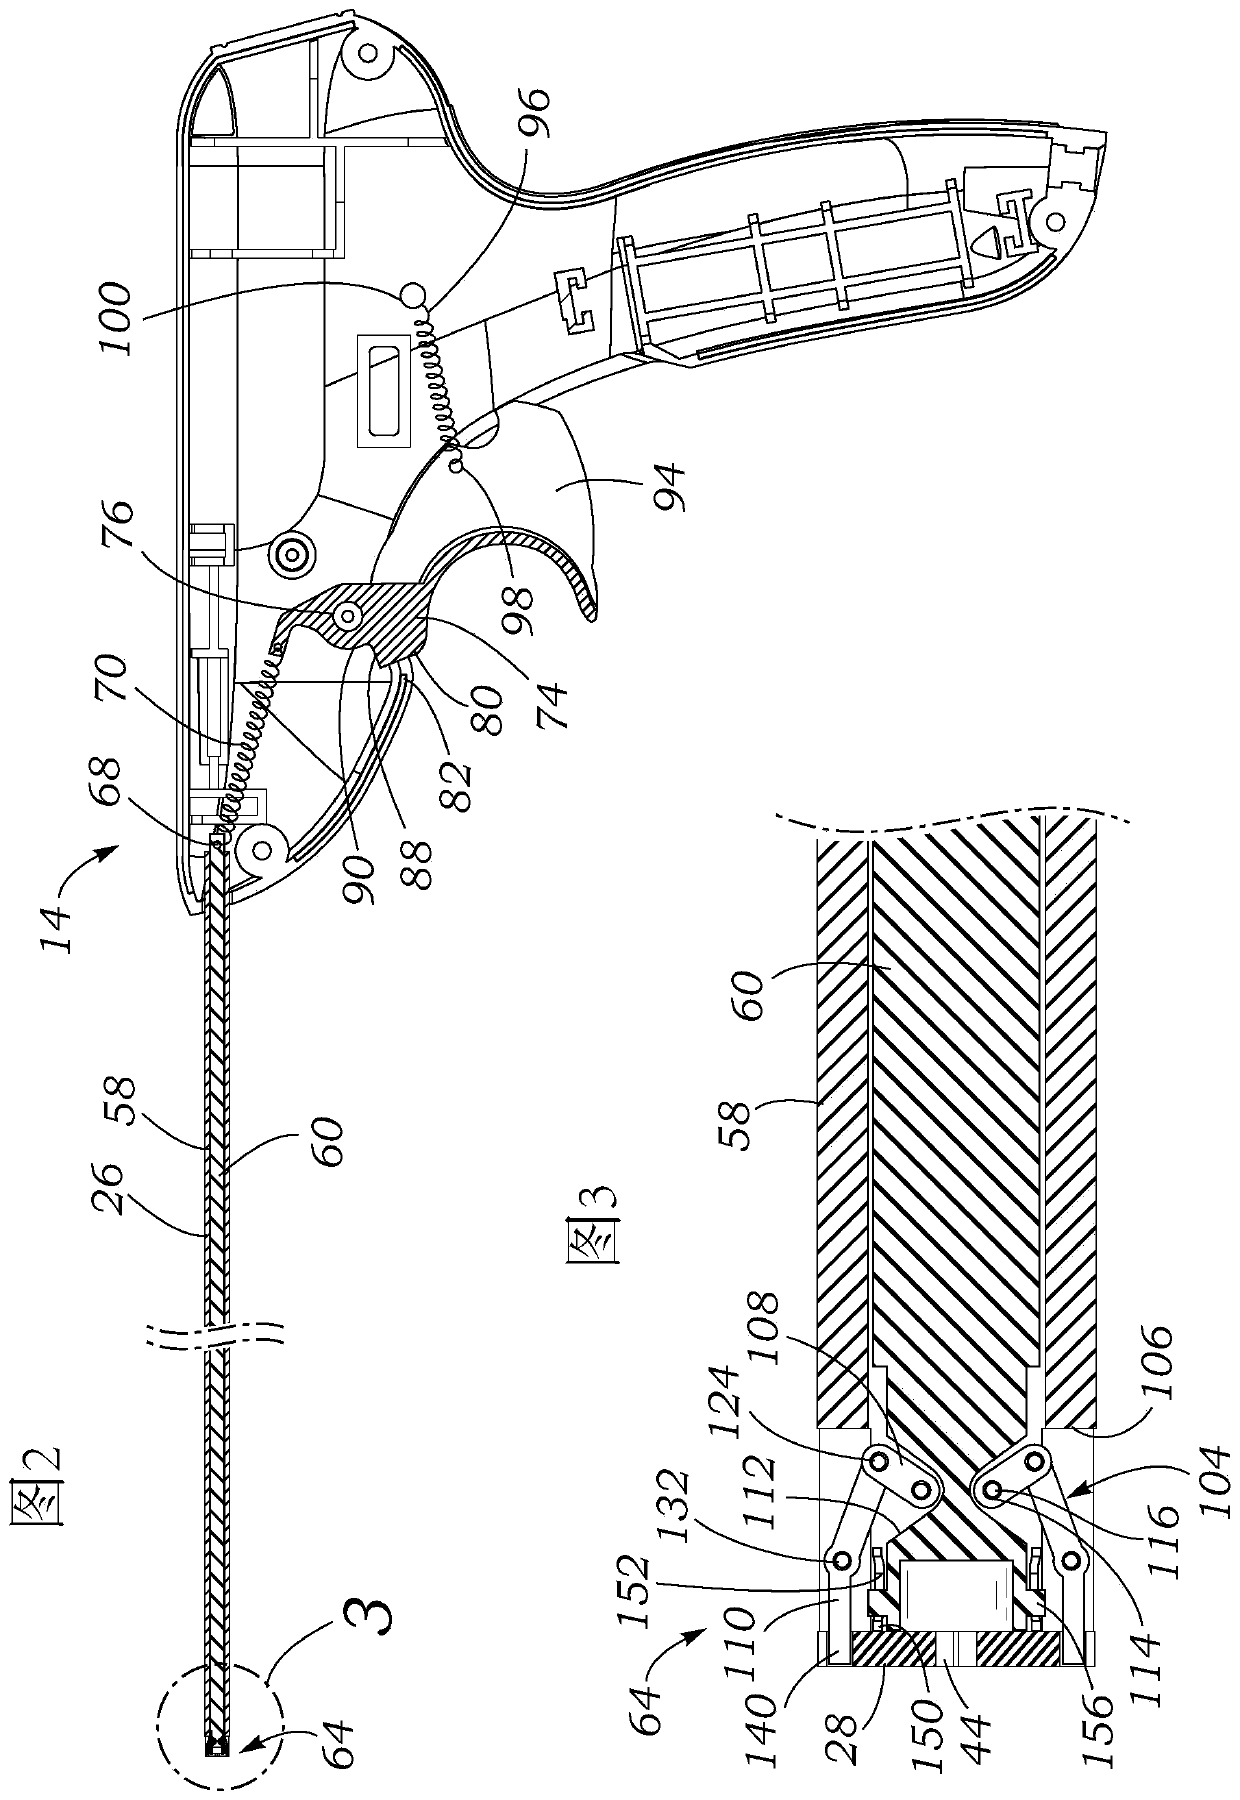 Suture clips, deployment devices therefor, and methods of use